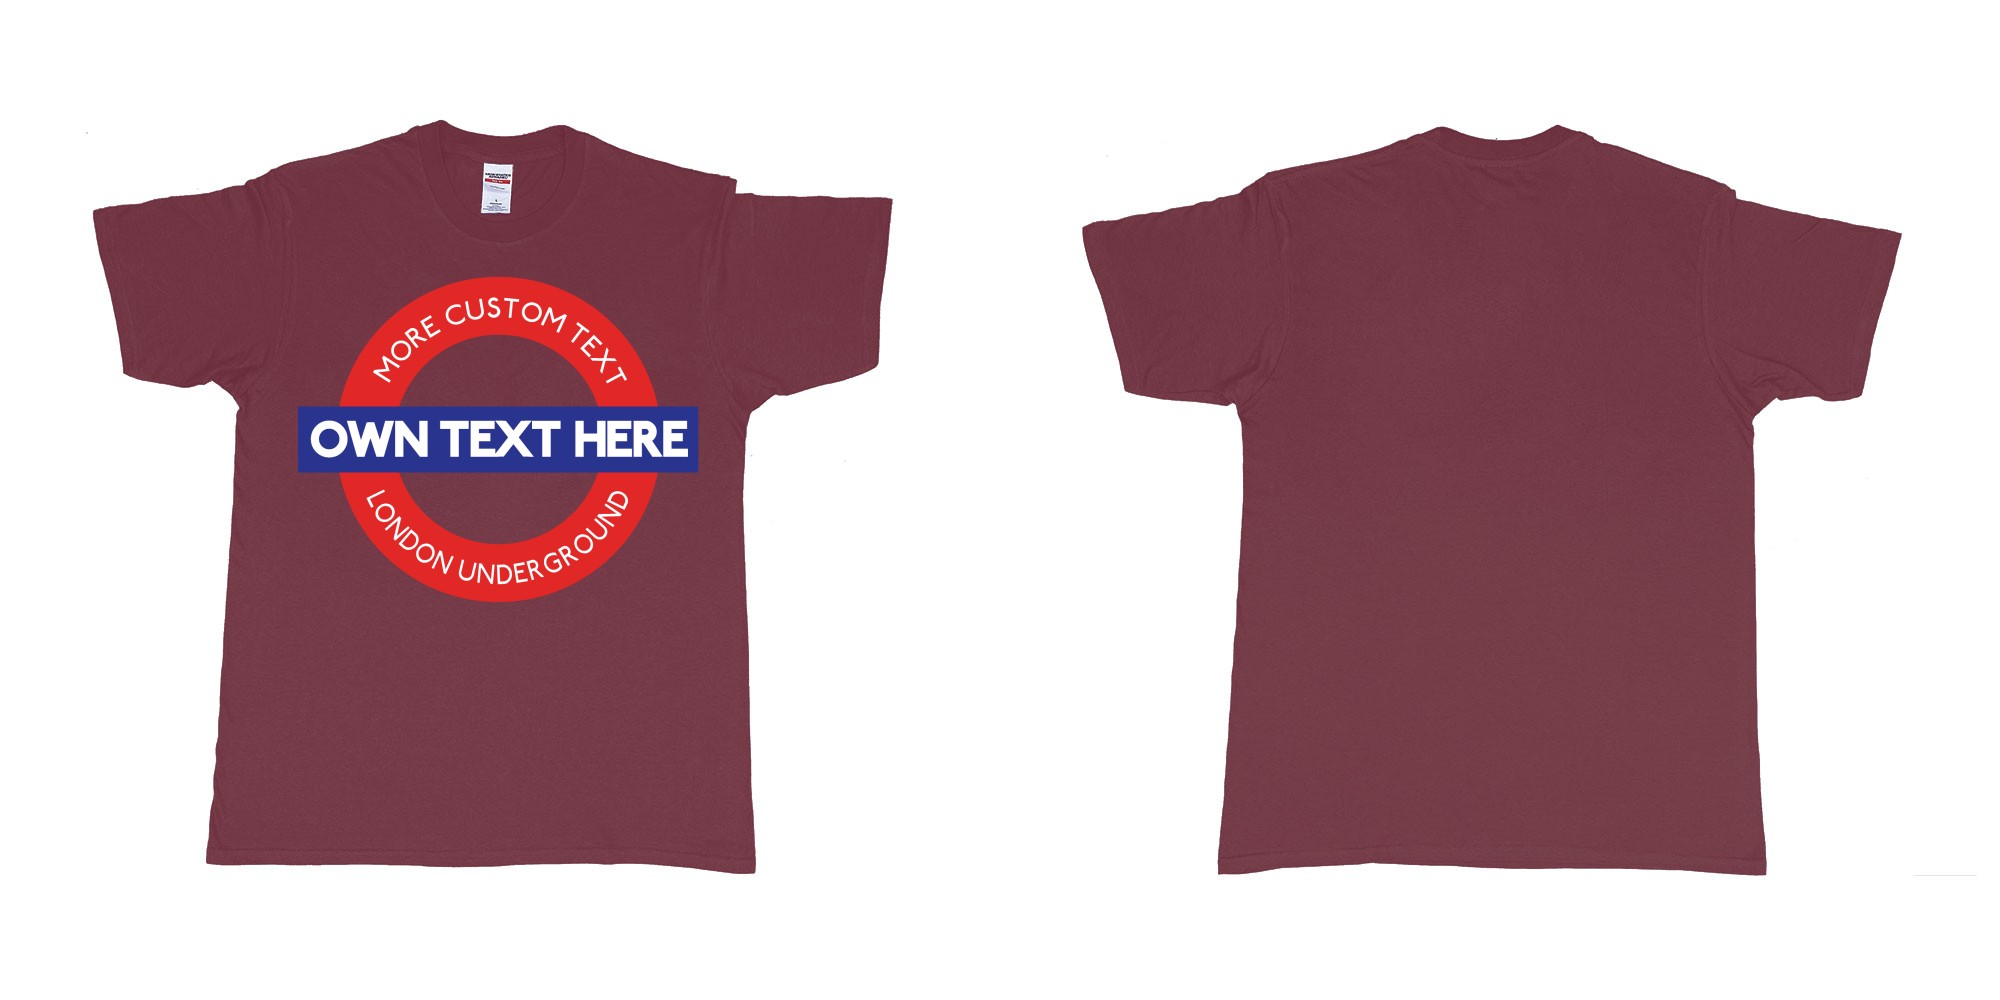 Custom tshirt design london underground logo custom design in fabric color marron choice your own text made in Bali by The Pirate Way